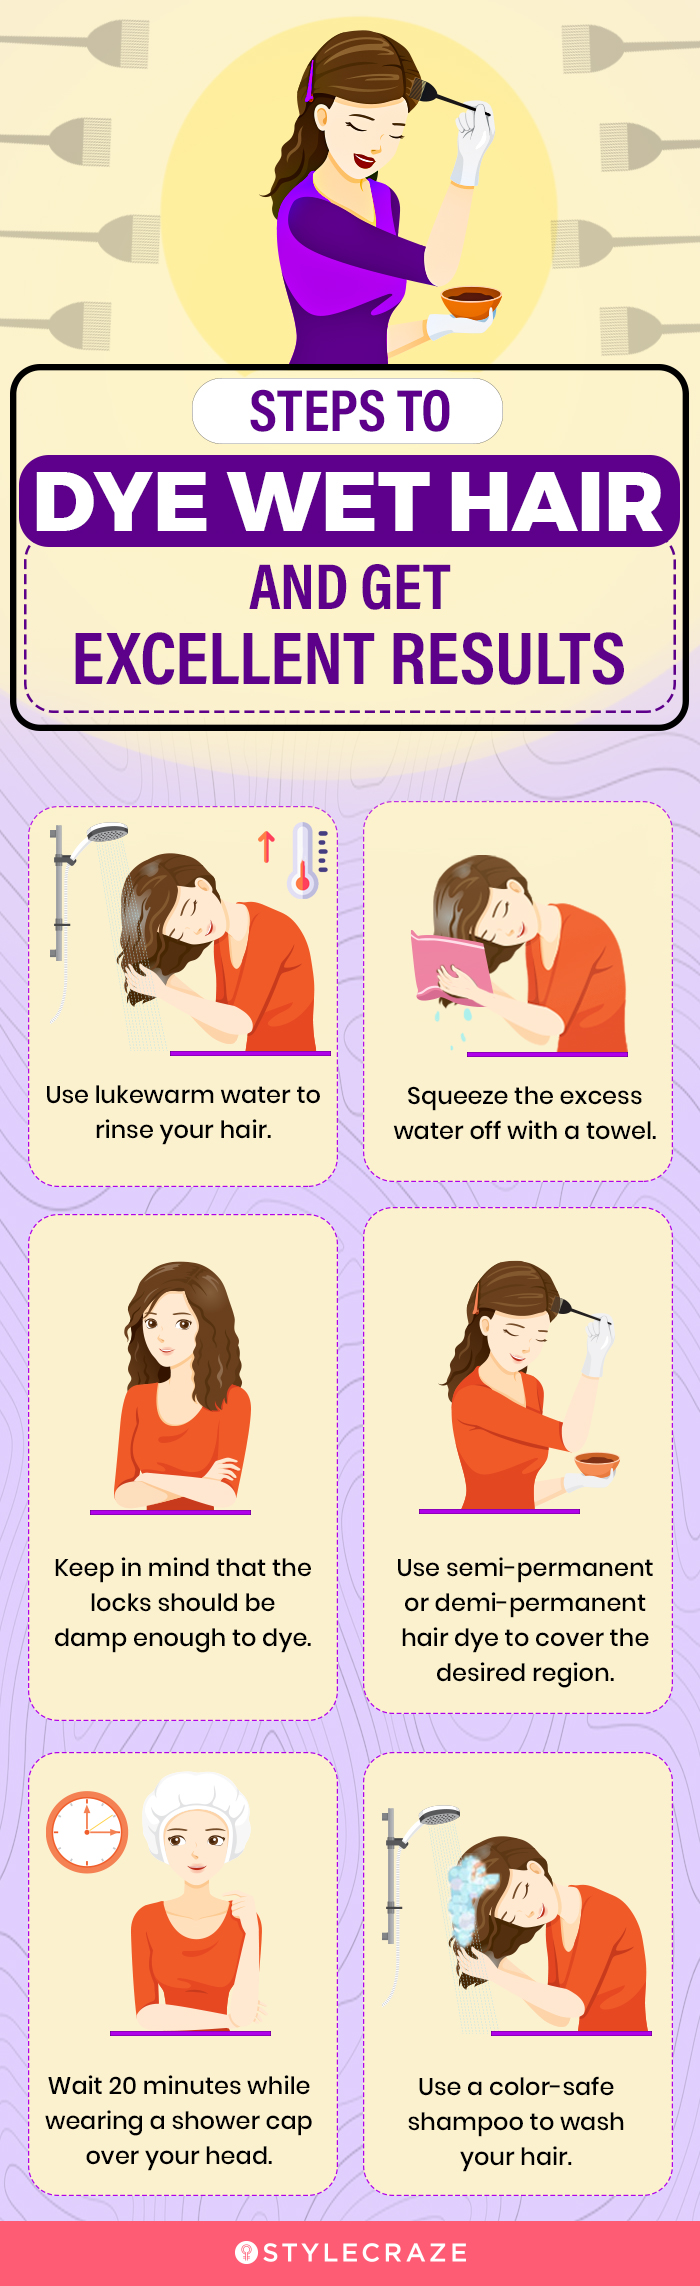 steps to dye wet hair and get excellent results [infographic]